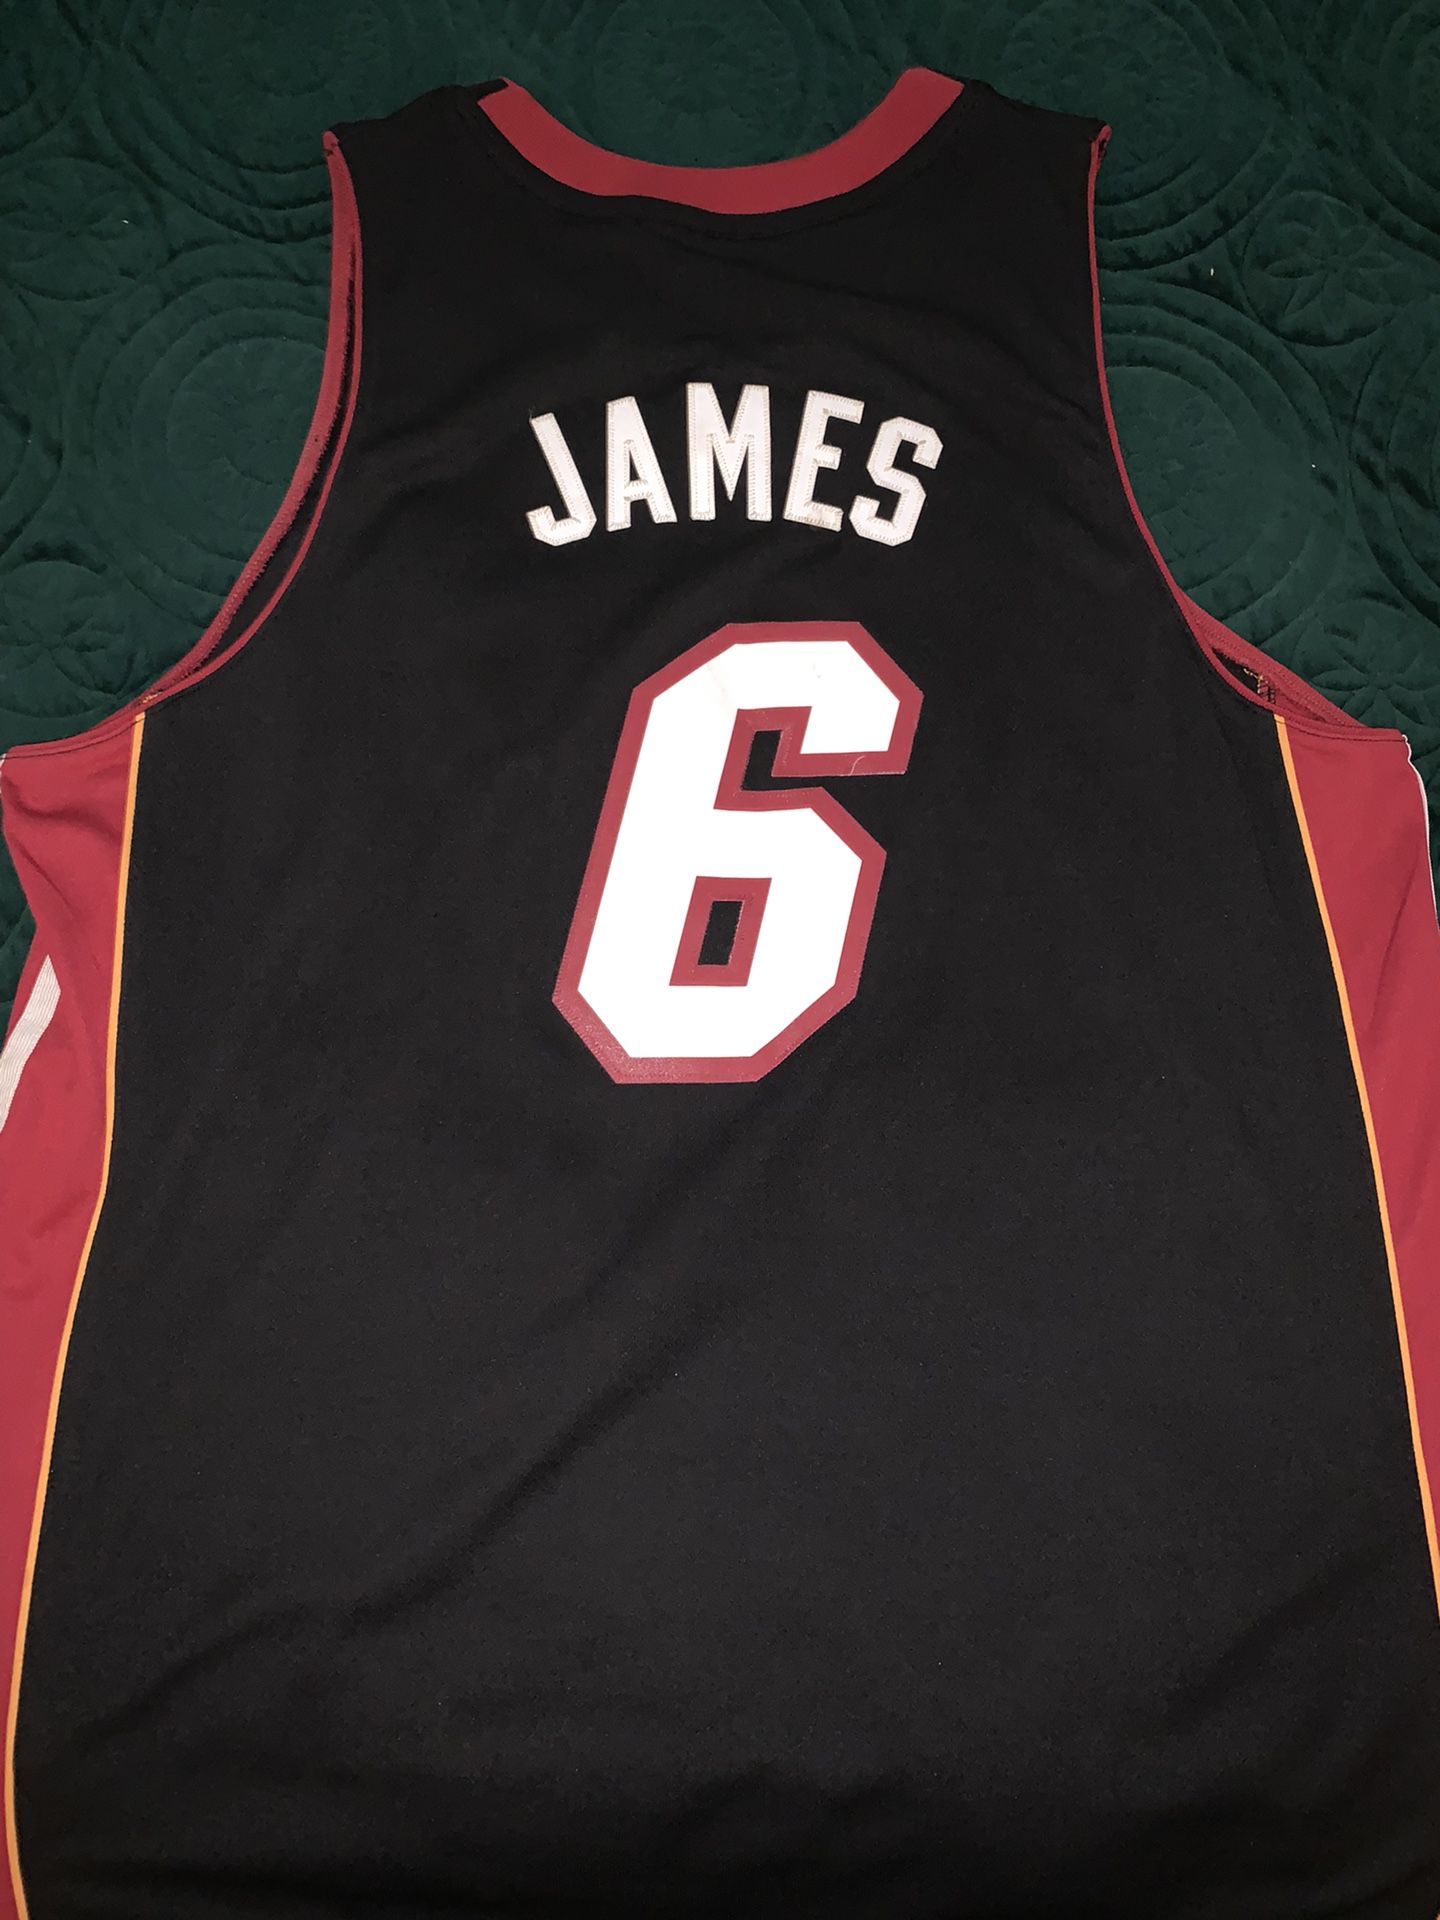 Lebron James Jersey for Sale in Sidney, OH - OfferUp